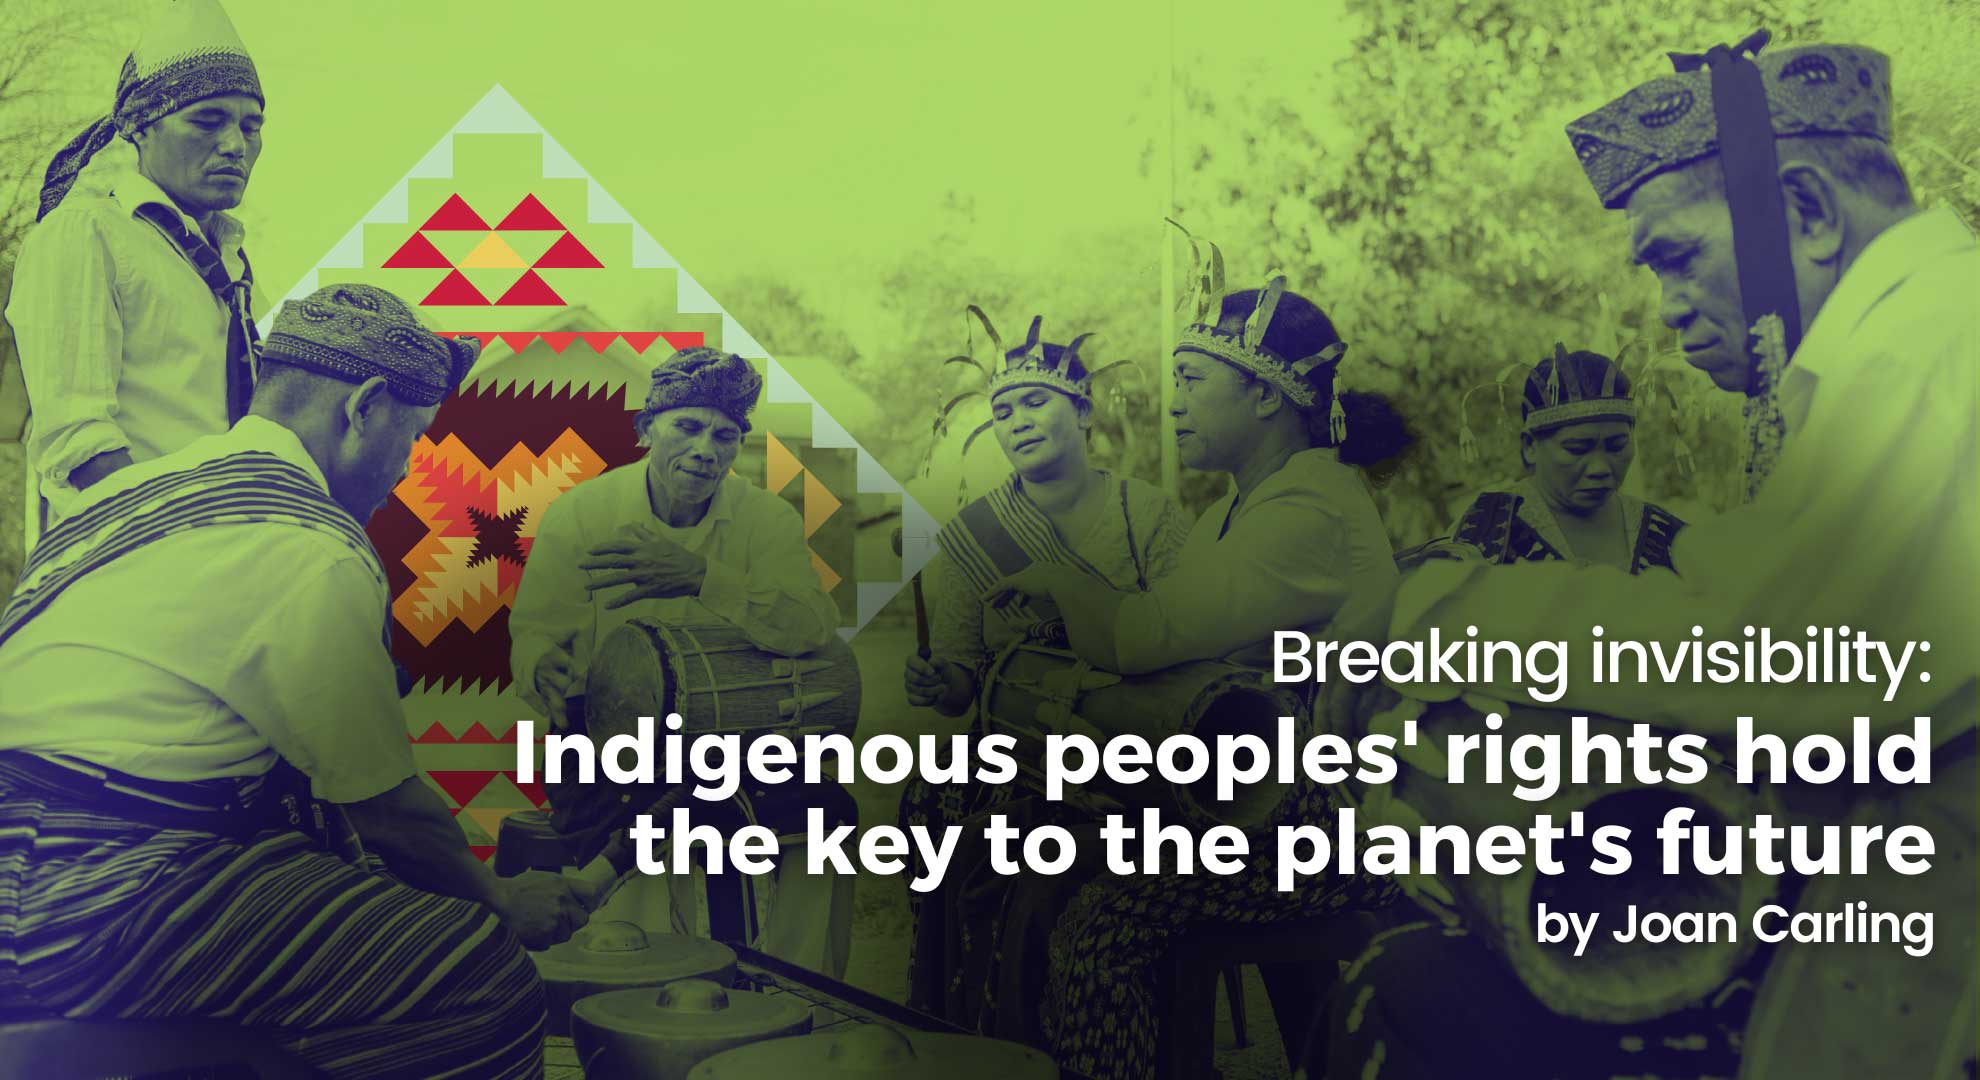 Breaking invisibility: The protection of Indigenous Peoples’ rights holds the key to the future of the planet